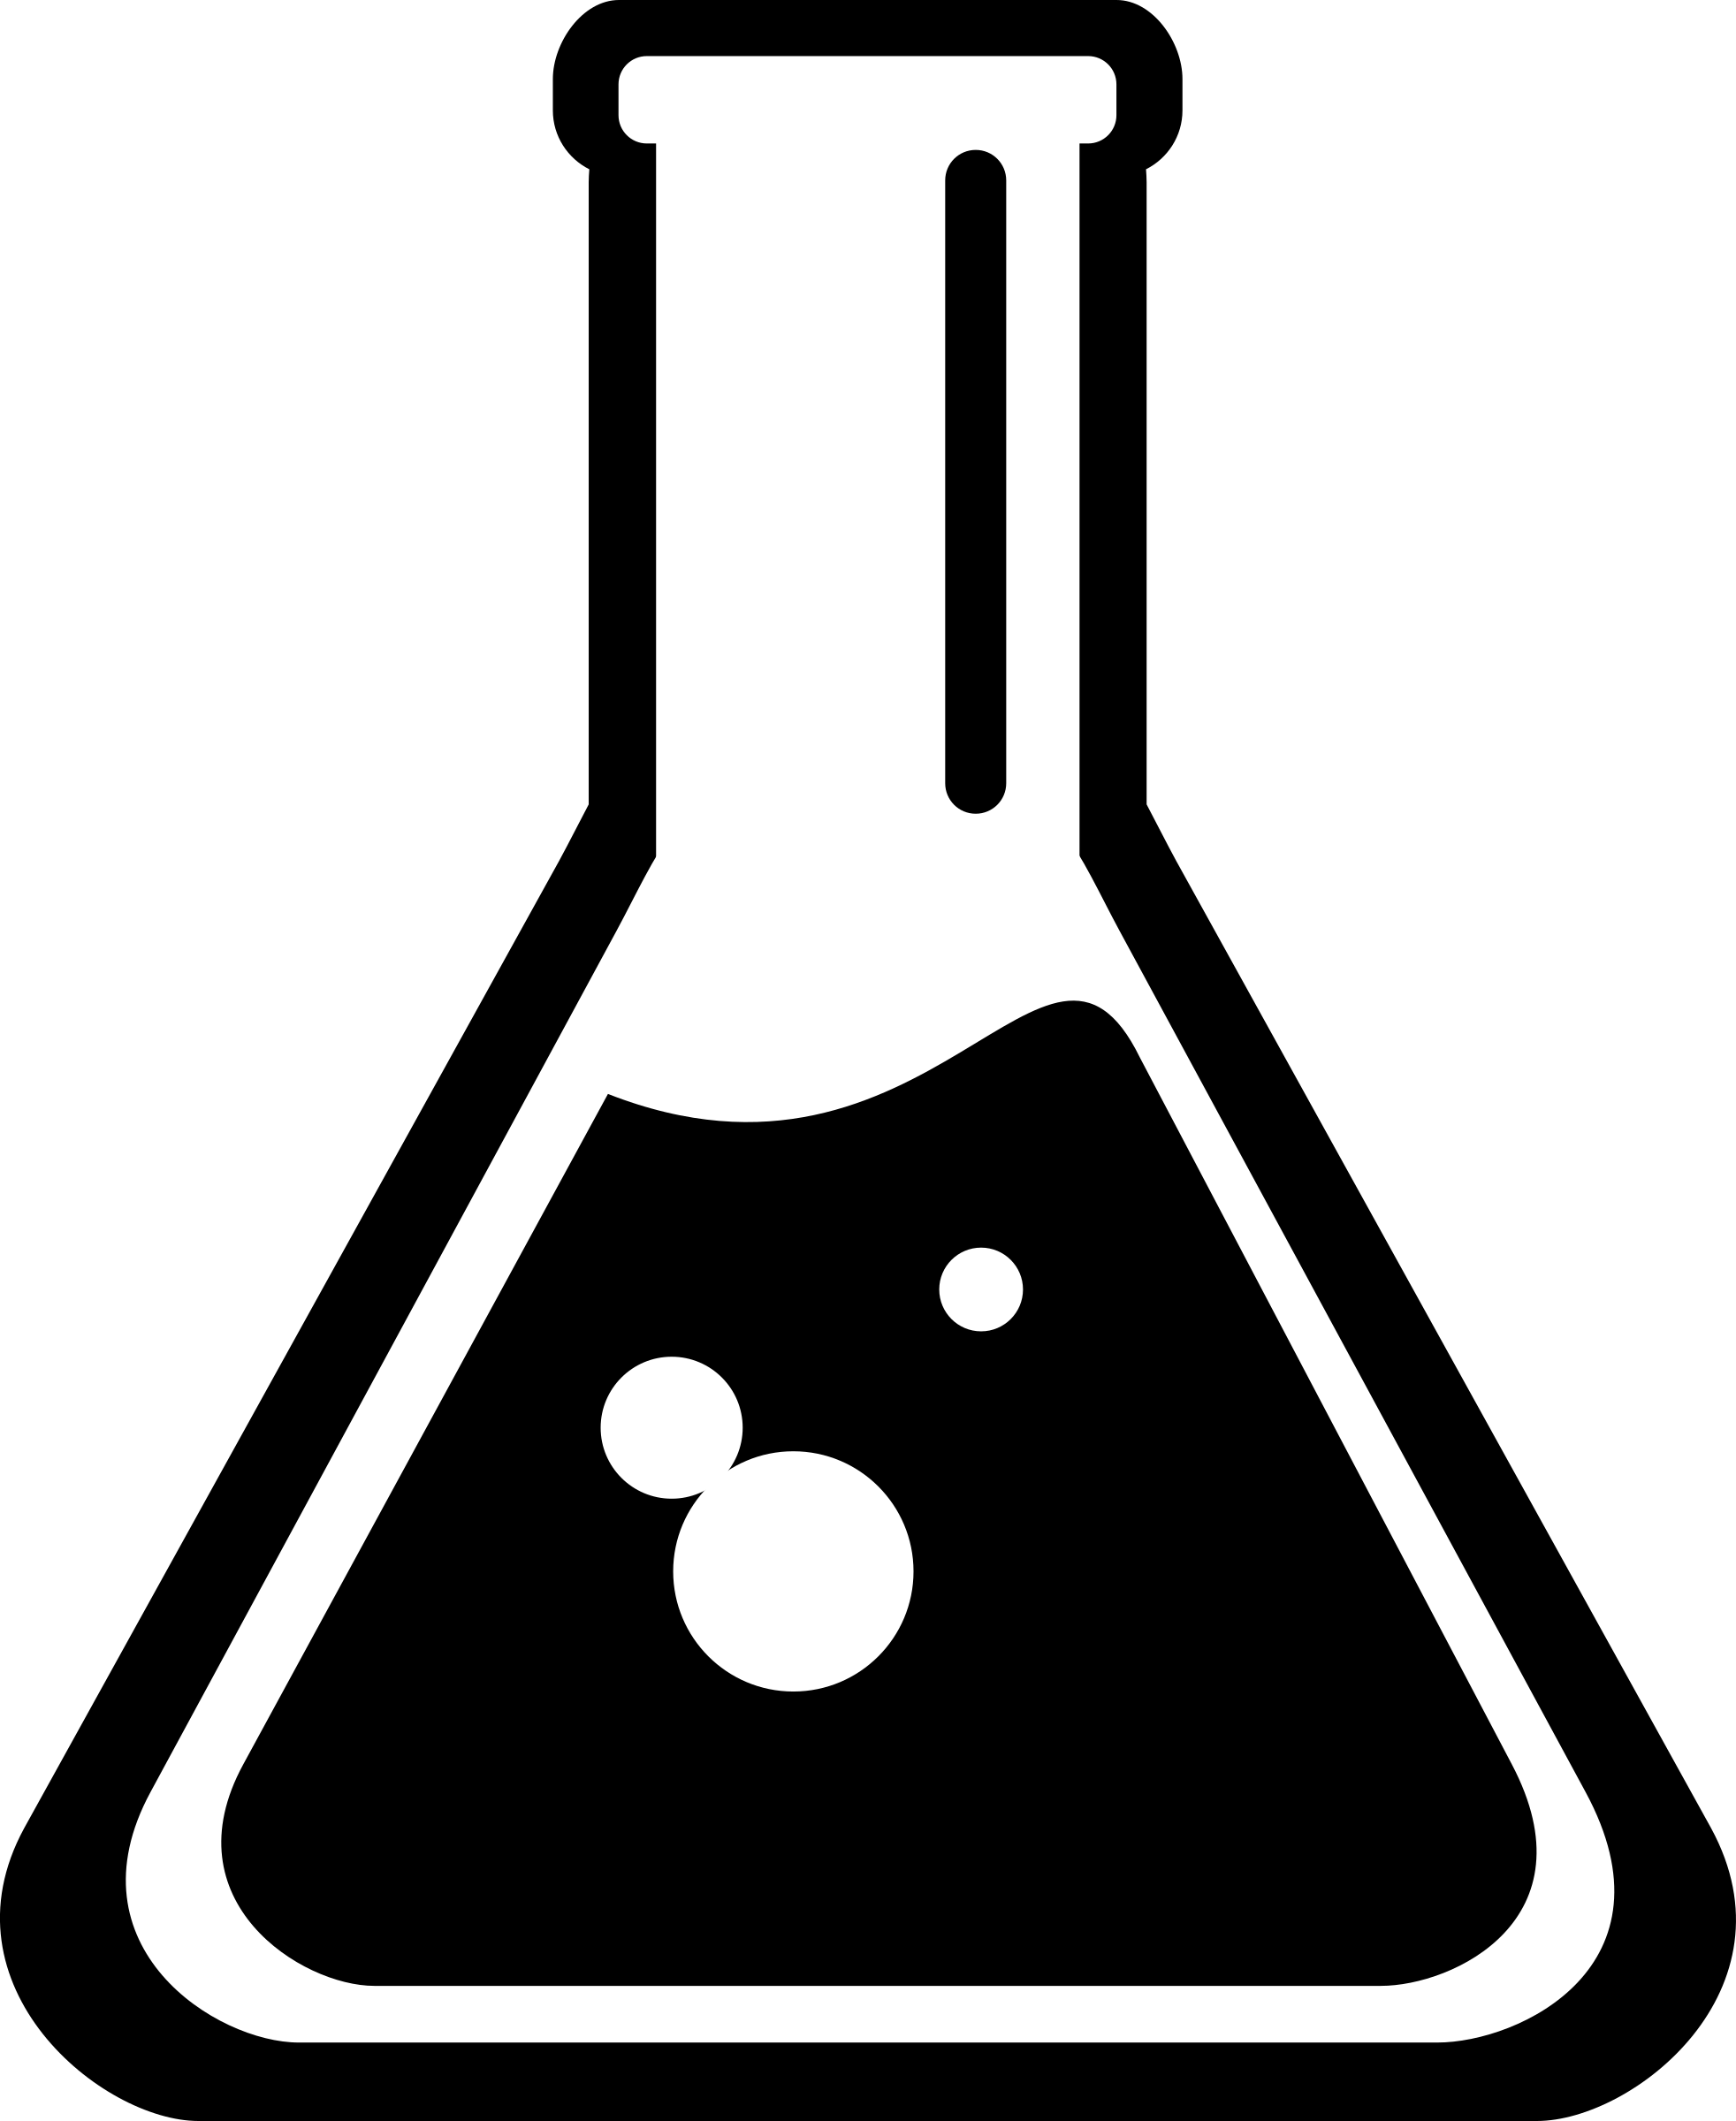 Icons png free and. Glove clipart science